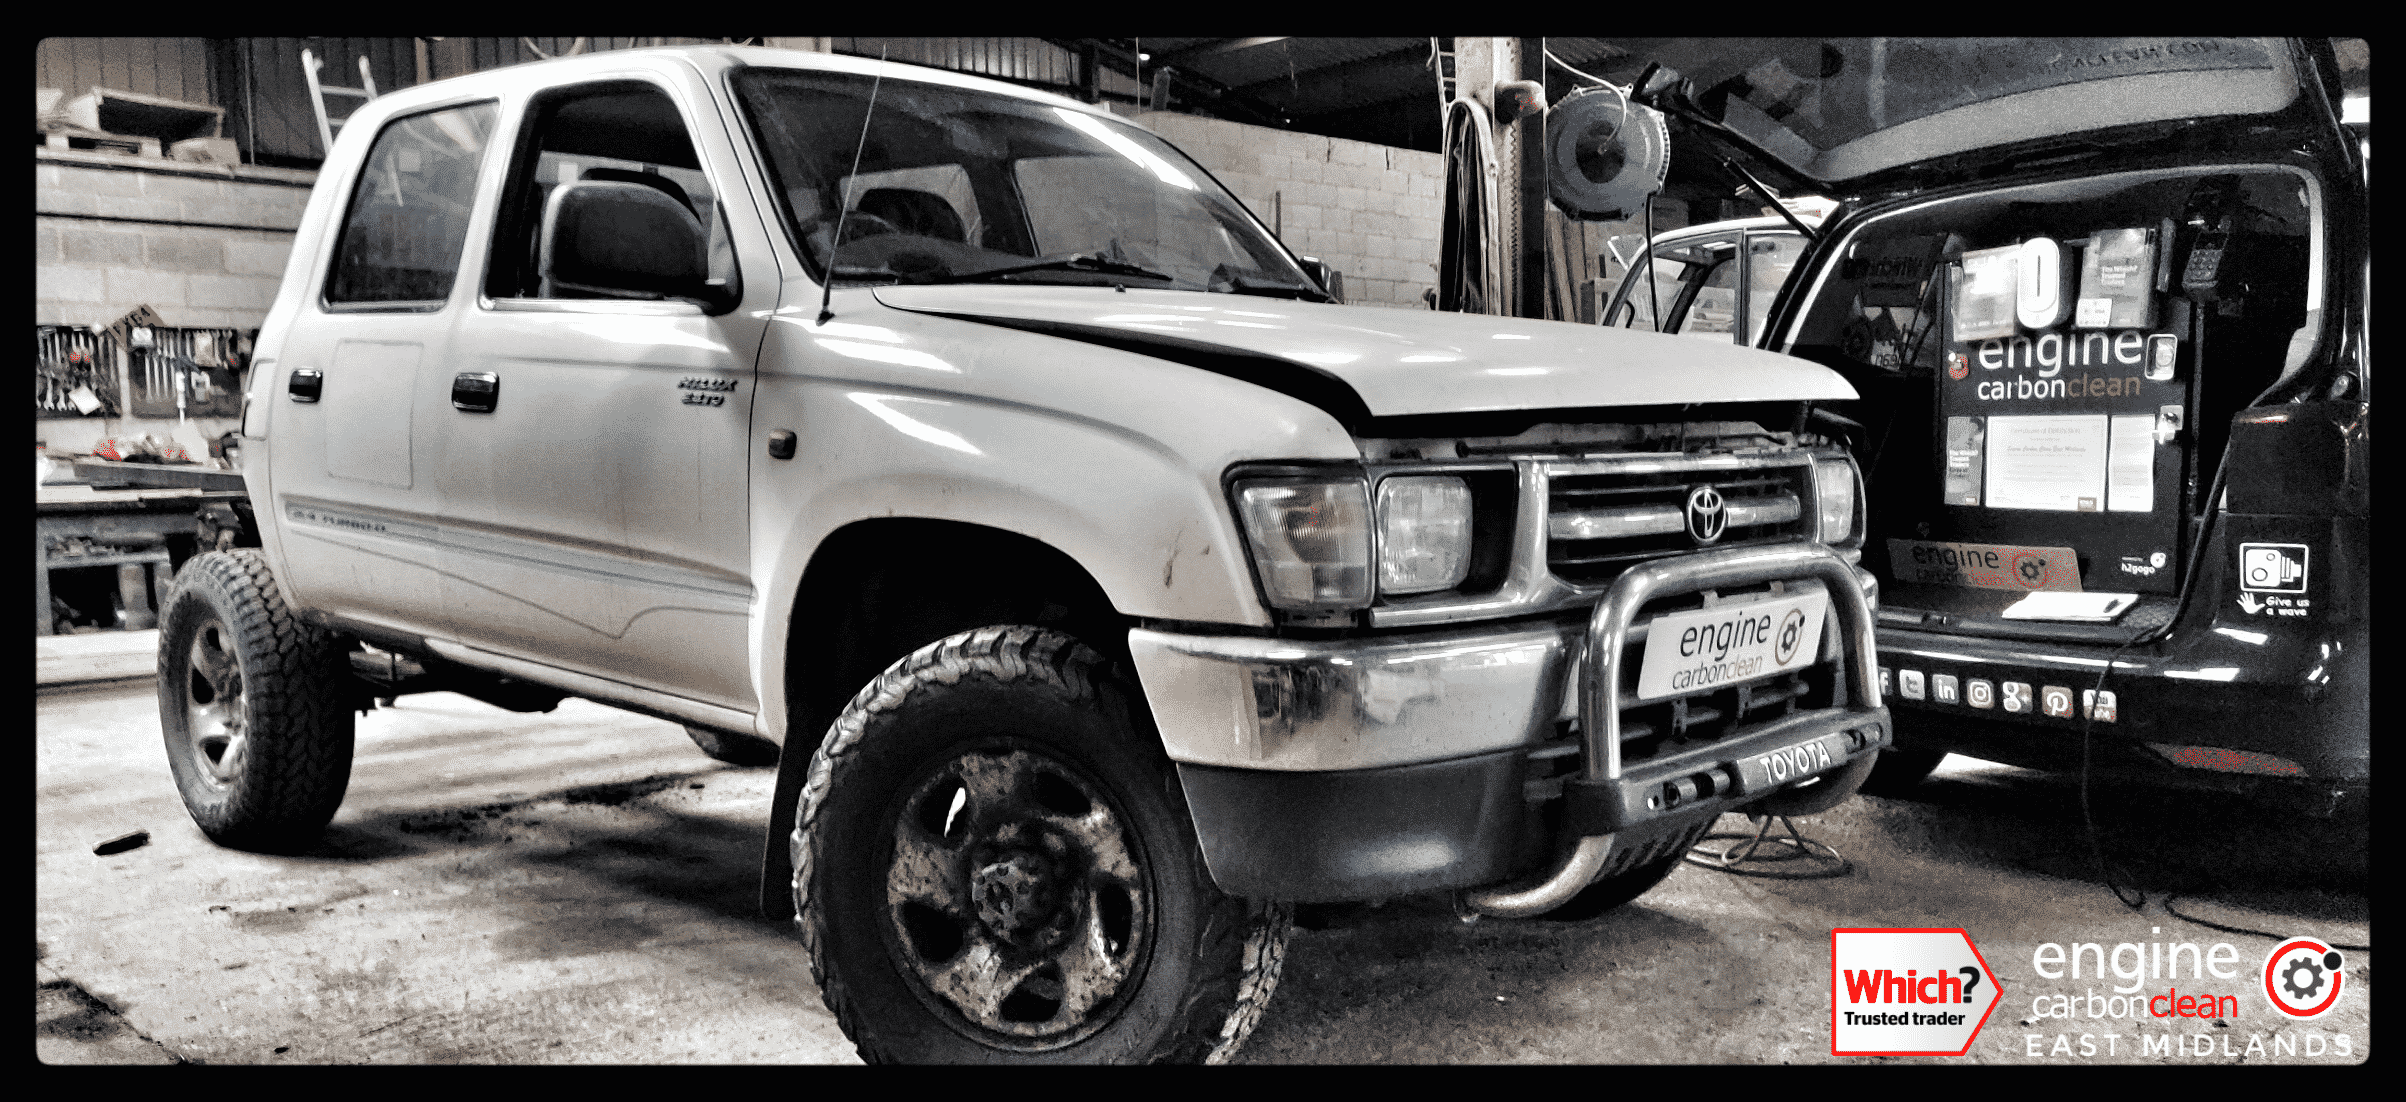 Toyota Hilux 2.4 diesel (2000 - 236,222 miles) with black smoke - diagnostic & Engine Carbon Clean